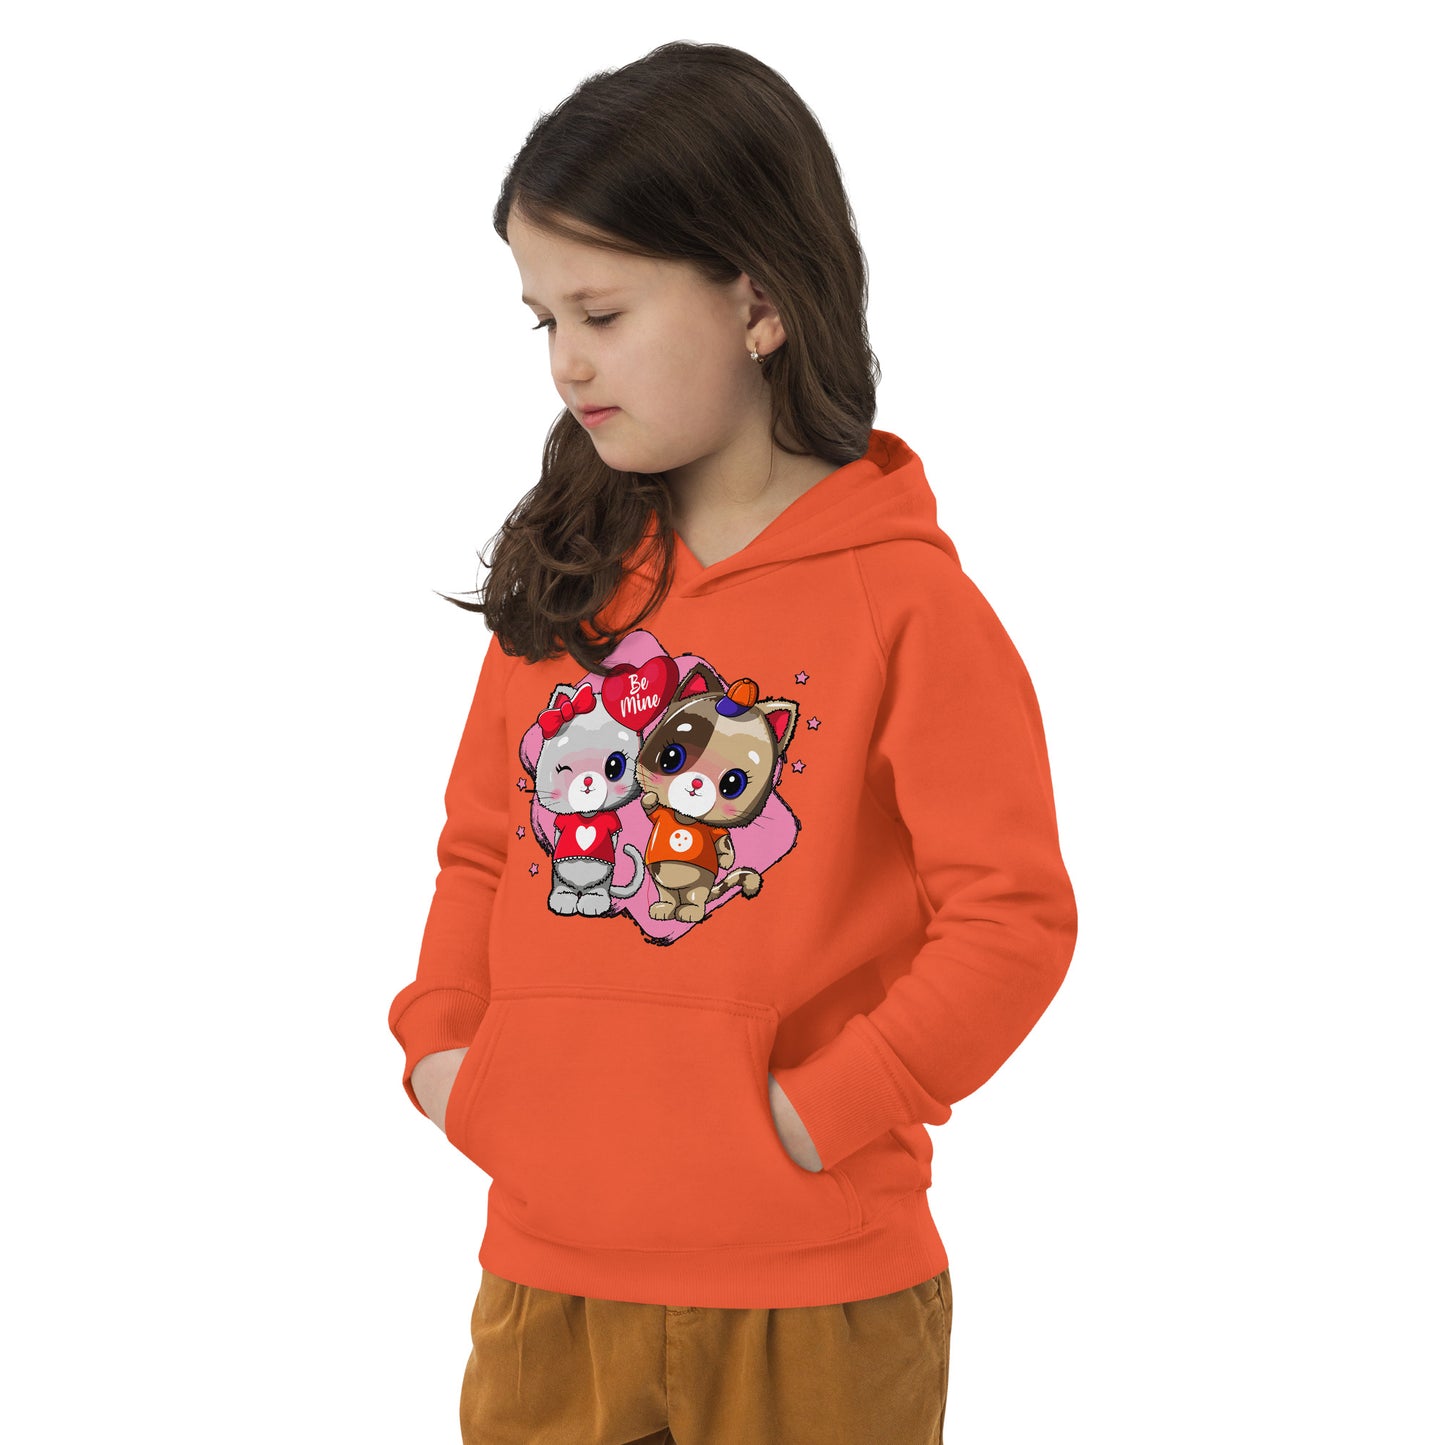 Lovely Cats in Love Hoodie, No. 0539